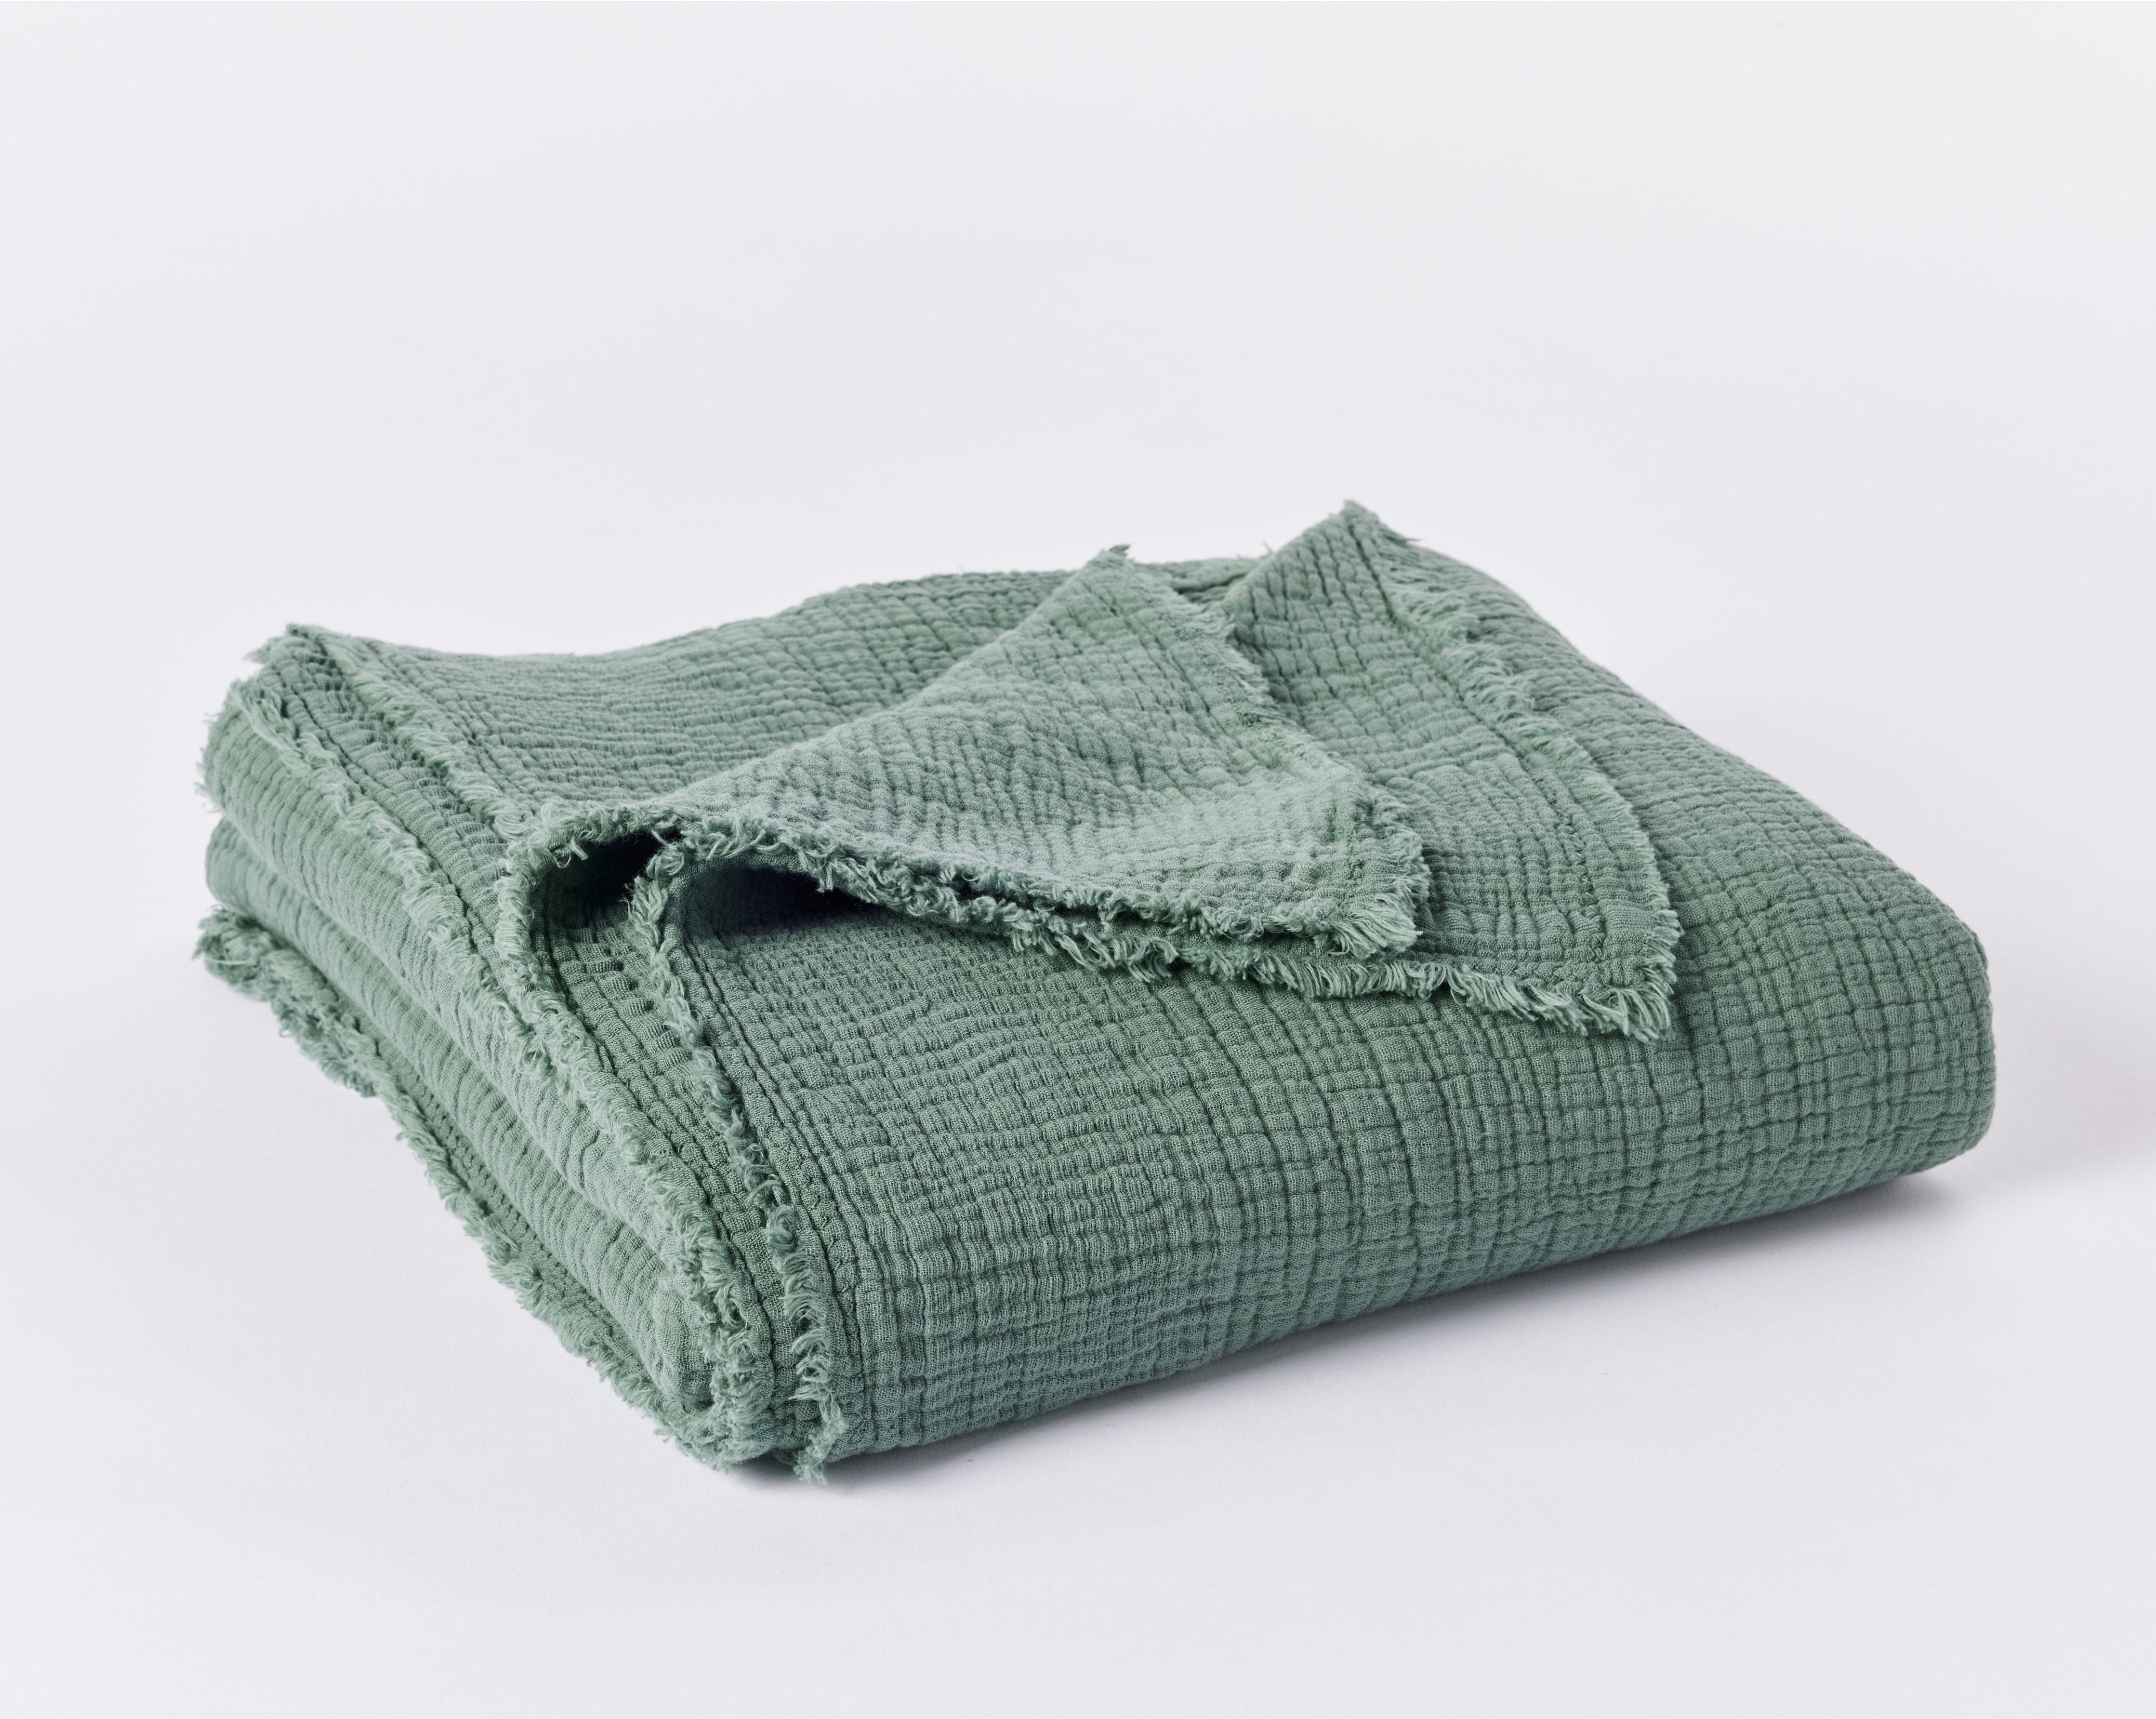 100% GOTS certified cotton blanket made with a crinkled finish that creates an airy, pliable shape.